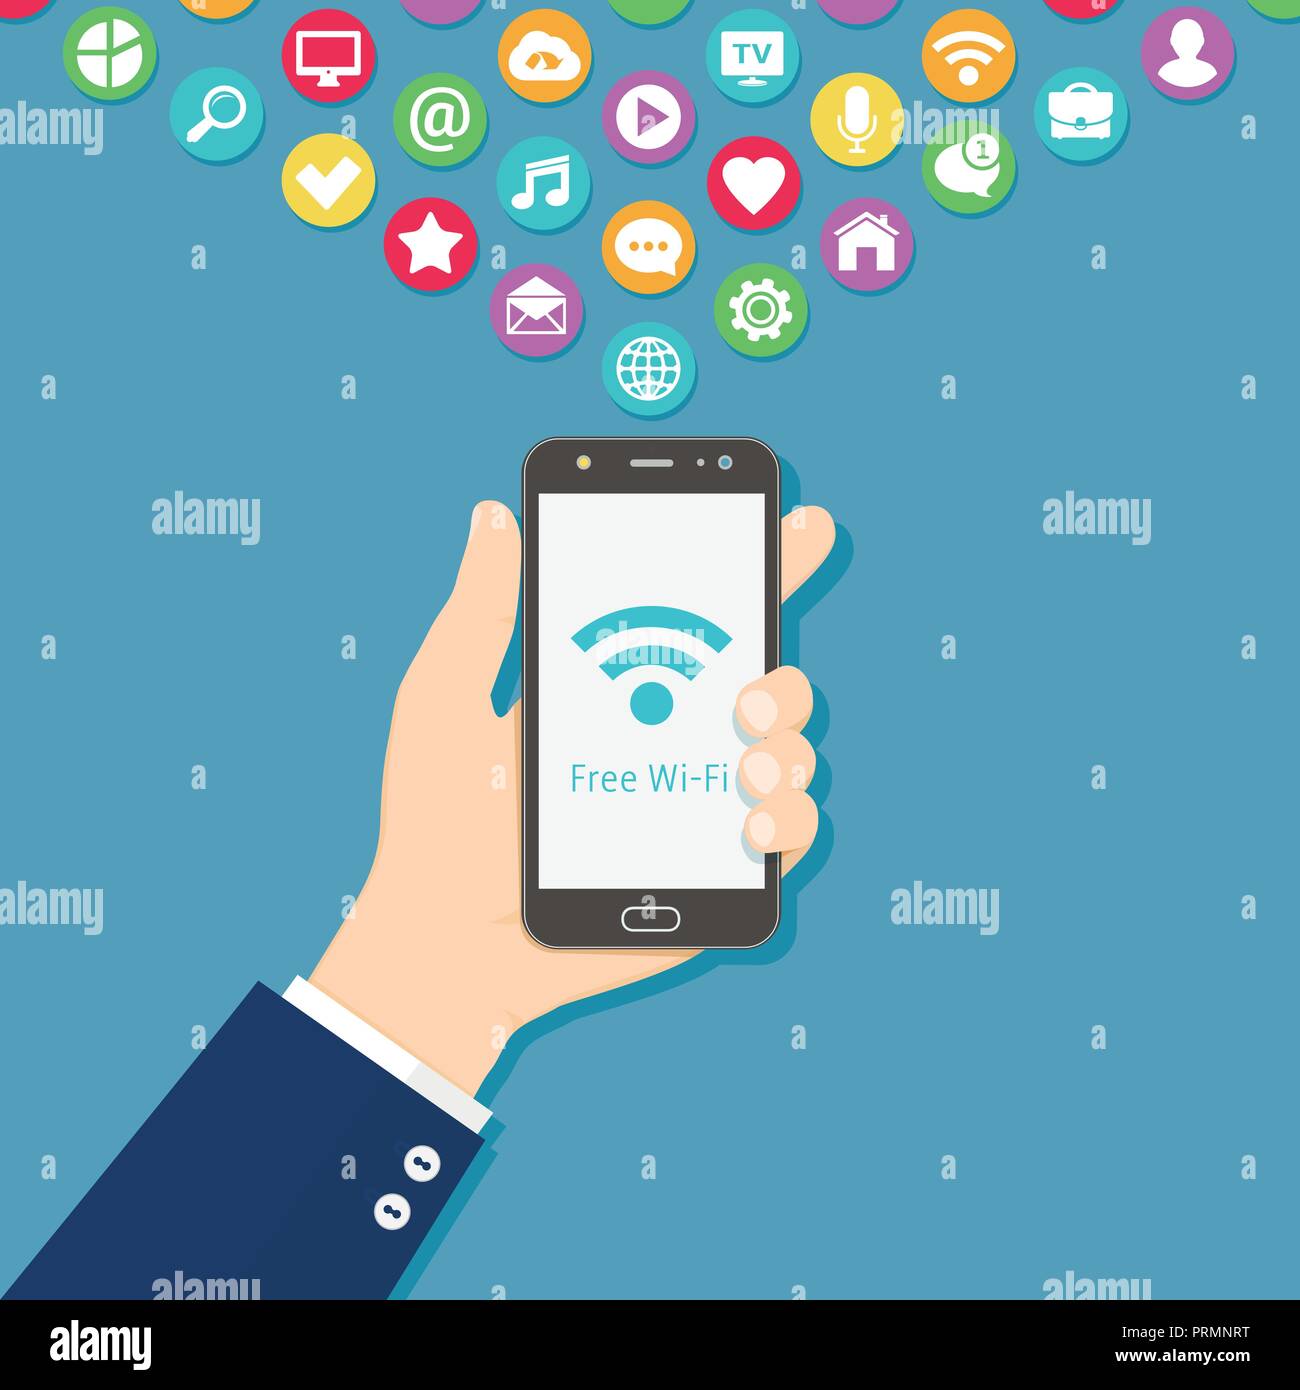 Hand holding smart phone with free wi-fi sign on screen. Free wi-fi flat design concept. Stock Vector